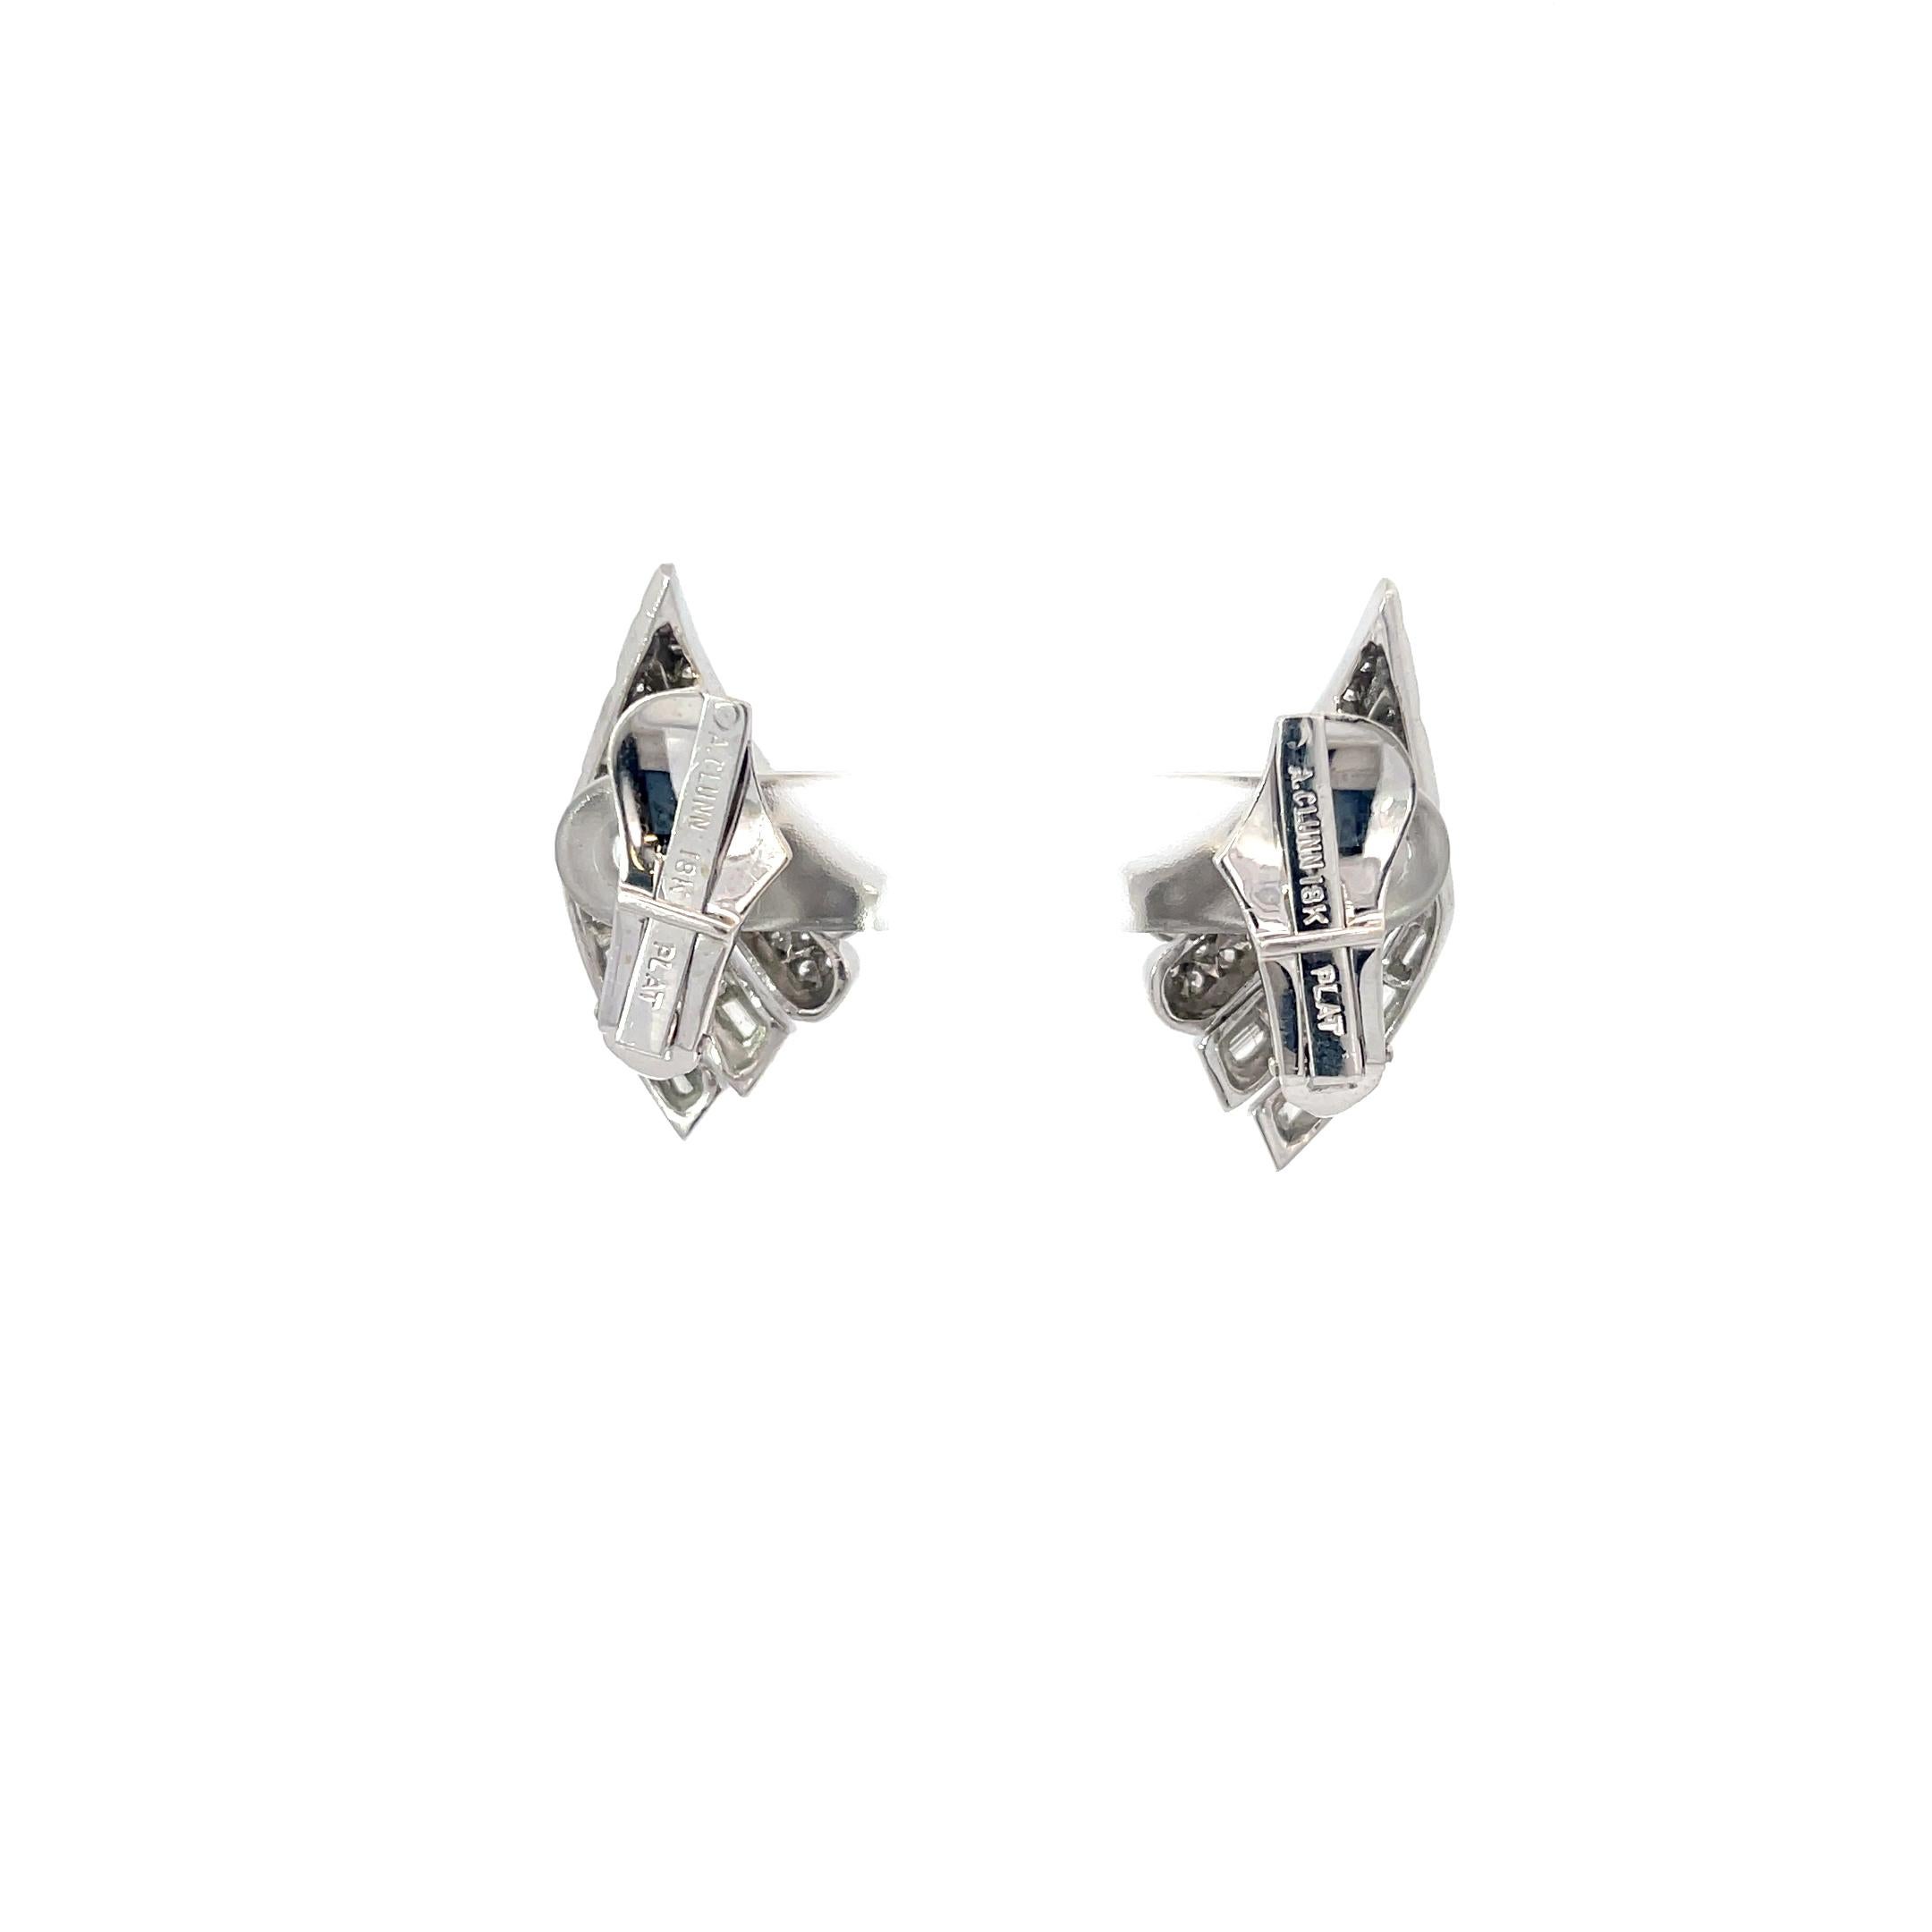 Round Cut Andrew Clunn 3ctw Diamond Earrings Platinum For Sale